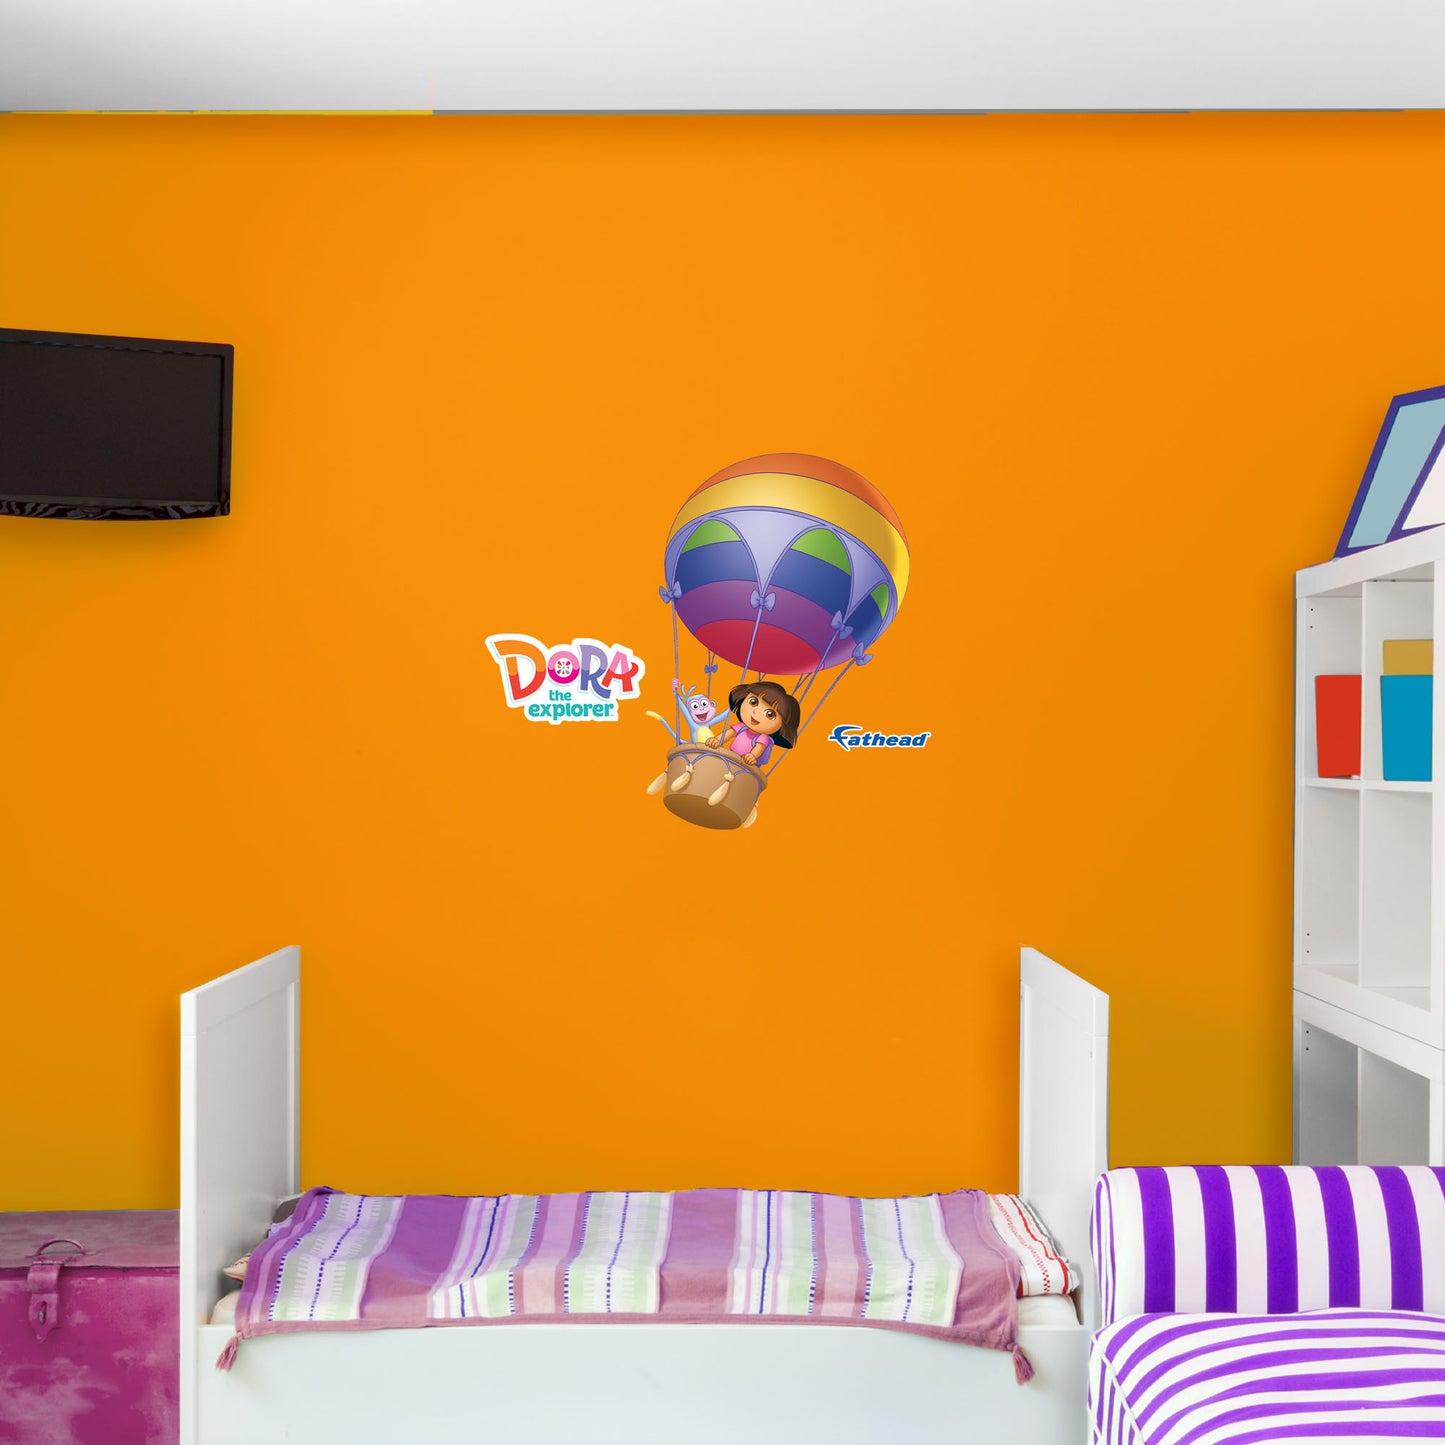 Dora the Explorer:  Dora and Boots in the Balloon RealBig        - Officially Licensed Nickelodeon Removable     Adhesive Decal